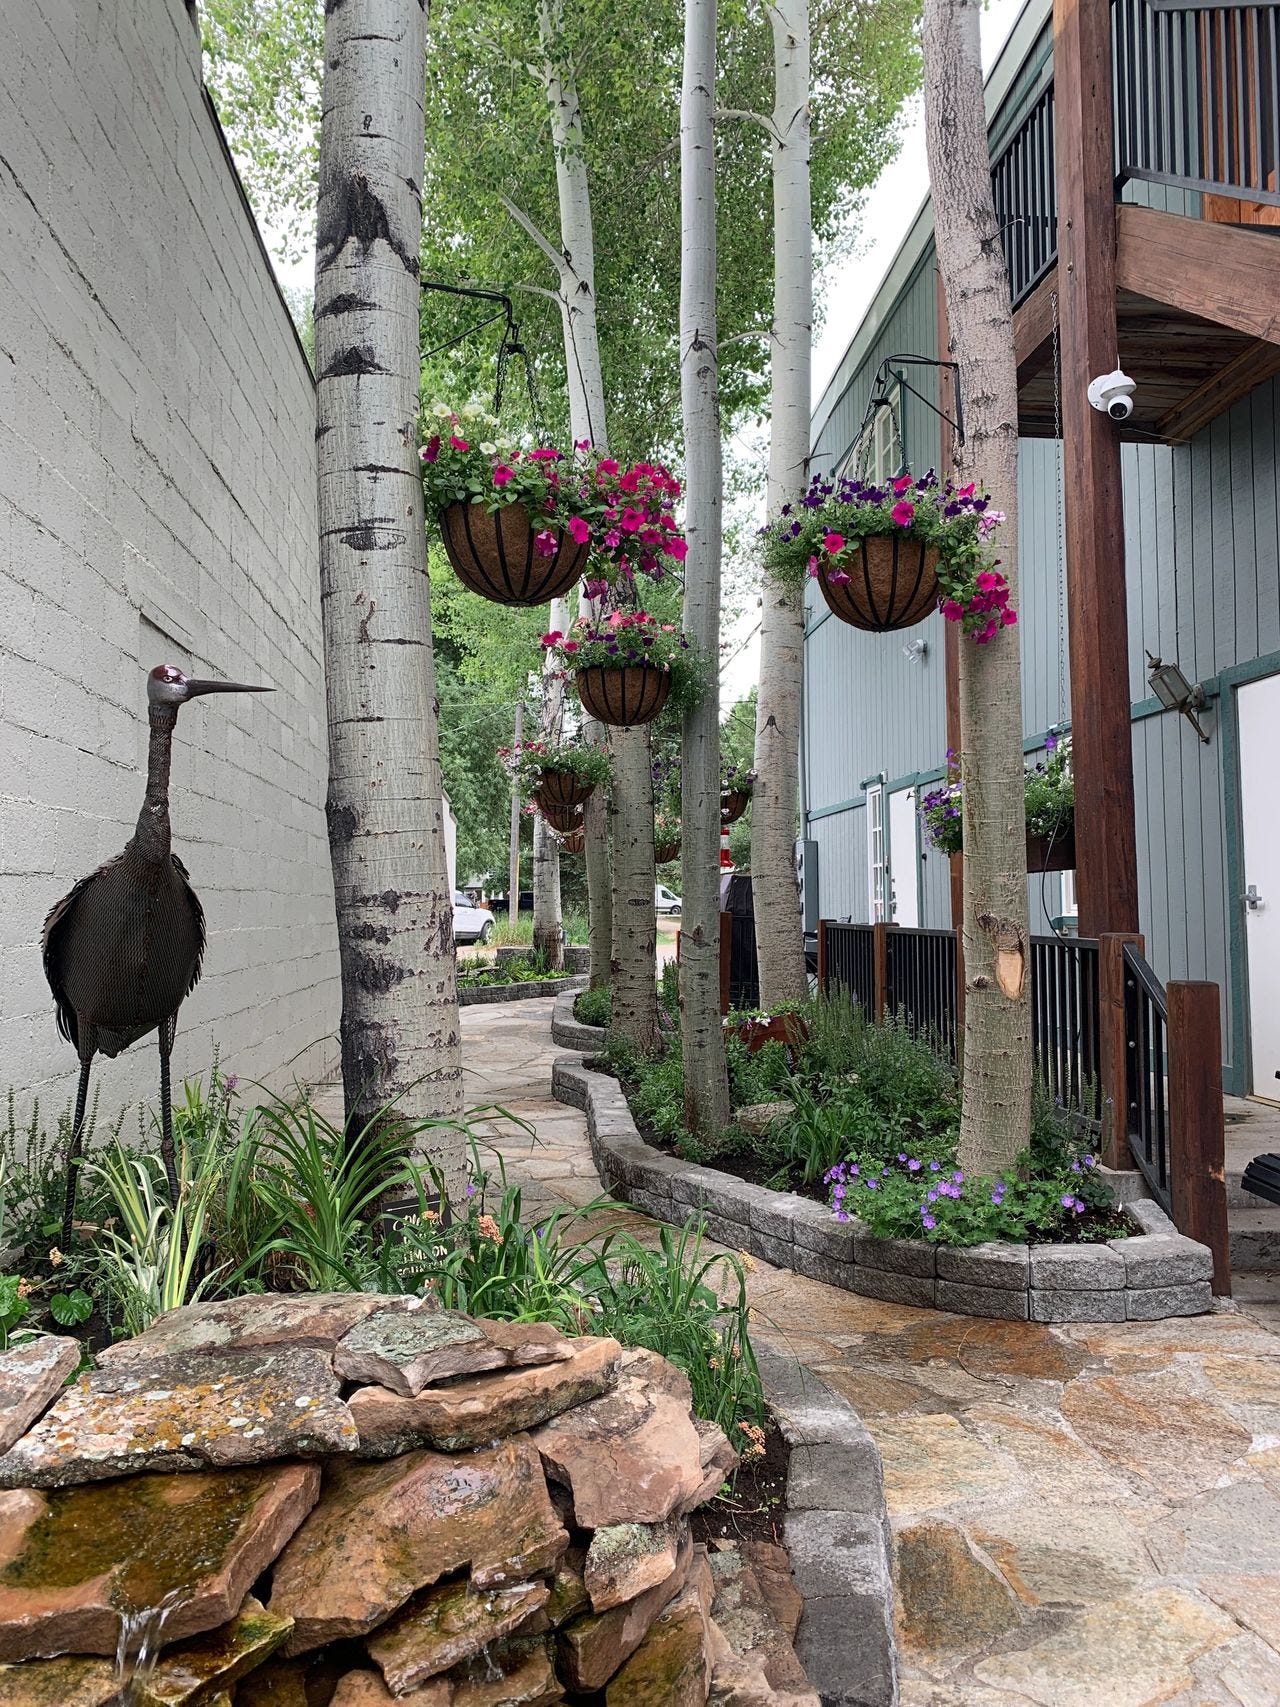 I loved this pretty walkway in Ennis, Montana with flower pots hanging from trees.